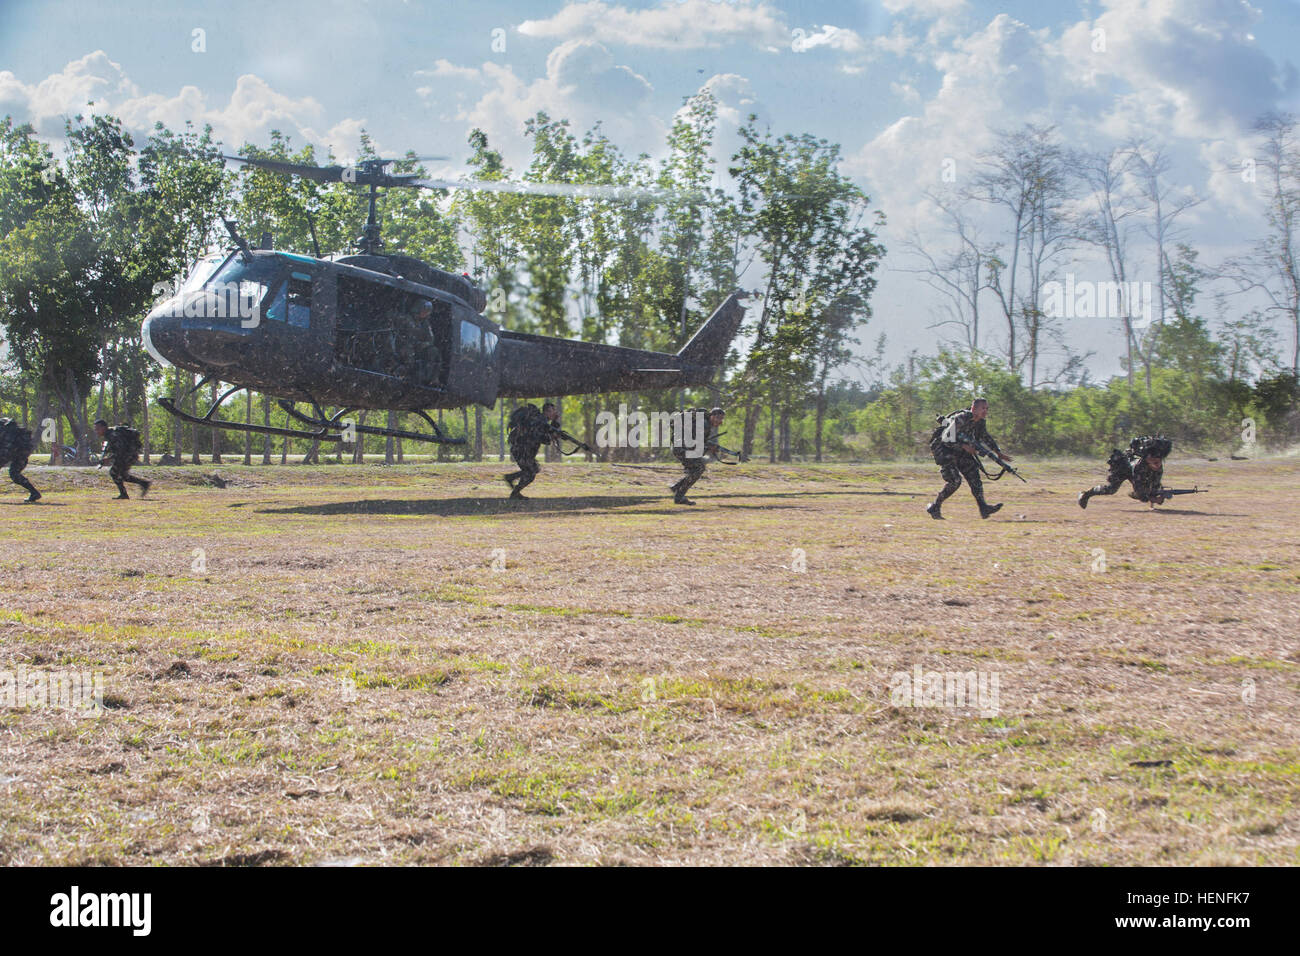 Armed Forces of the Philippines and U.S service members exit a helicopter during air assault training at Fort Magsaysay, Philippines, May 5, 2014. Philippine Soldiers of Charlie Company, 20th Infantry Battalion bound forward in squad elements to engage pop-up targets during Balikatan 2014. This year marks the 30th iteration of the exercise, which is an annual Republic of the Philippines-U.S. military bilateral training exercise and humanitarian civic assistance engagement. (U.S. Army Photo by Spc. Michael G. Herrero/Released) Air assault live fire exercise 140505-A-IR245-121 Stock Photo